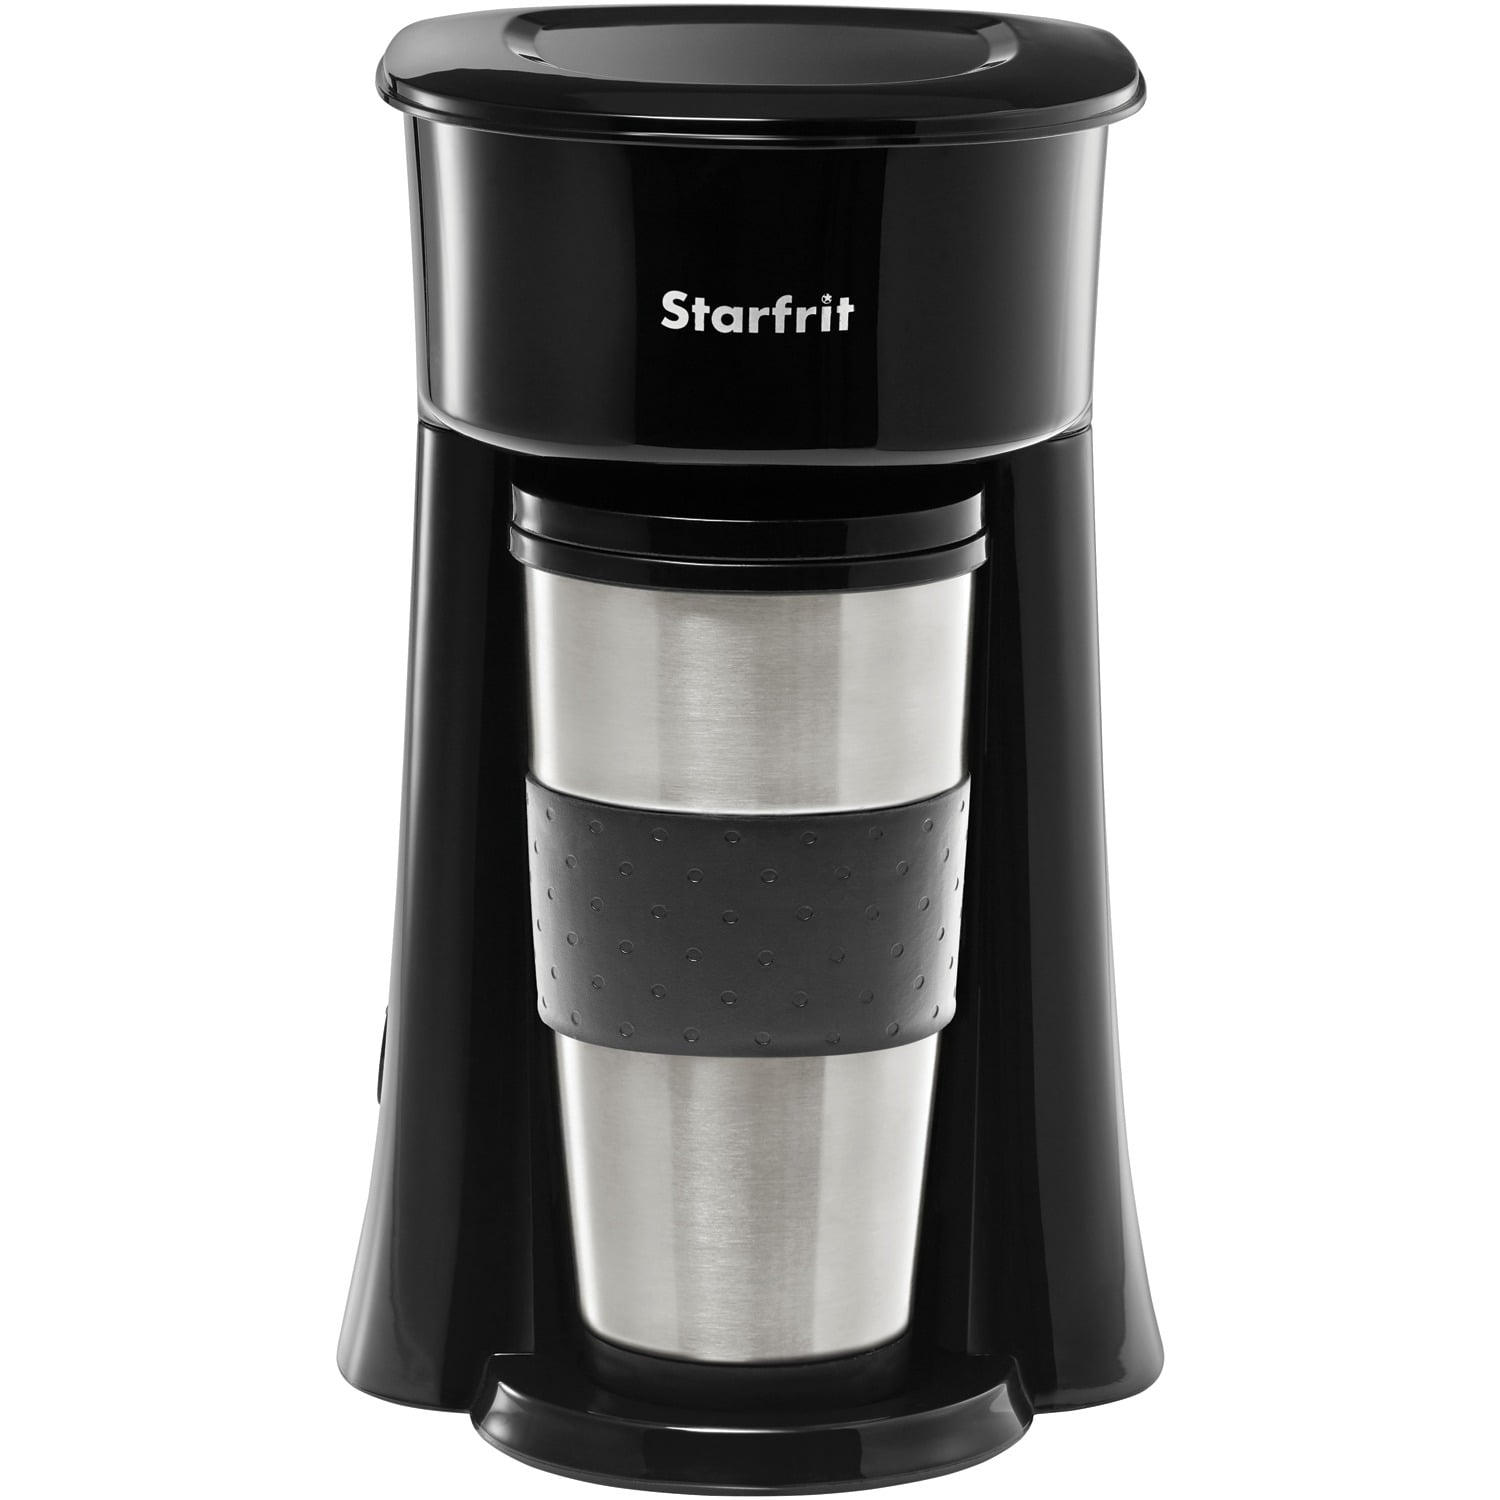 Starfrit 12-Cup Drip Coffee Maker - Programmable - 900 W - 1.90 quart - 12  Cup(s) - Multi-serve - Timer - Black, Stainless Steel - Glass Body